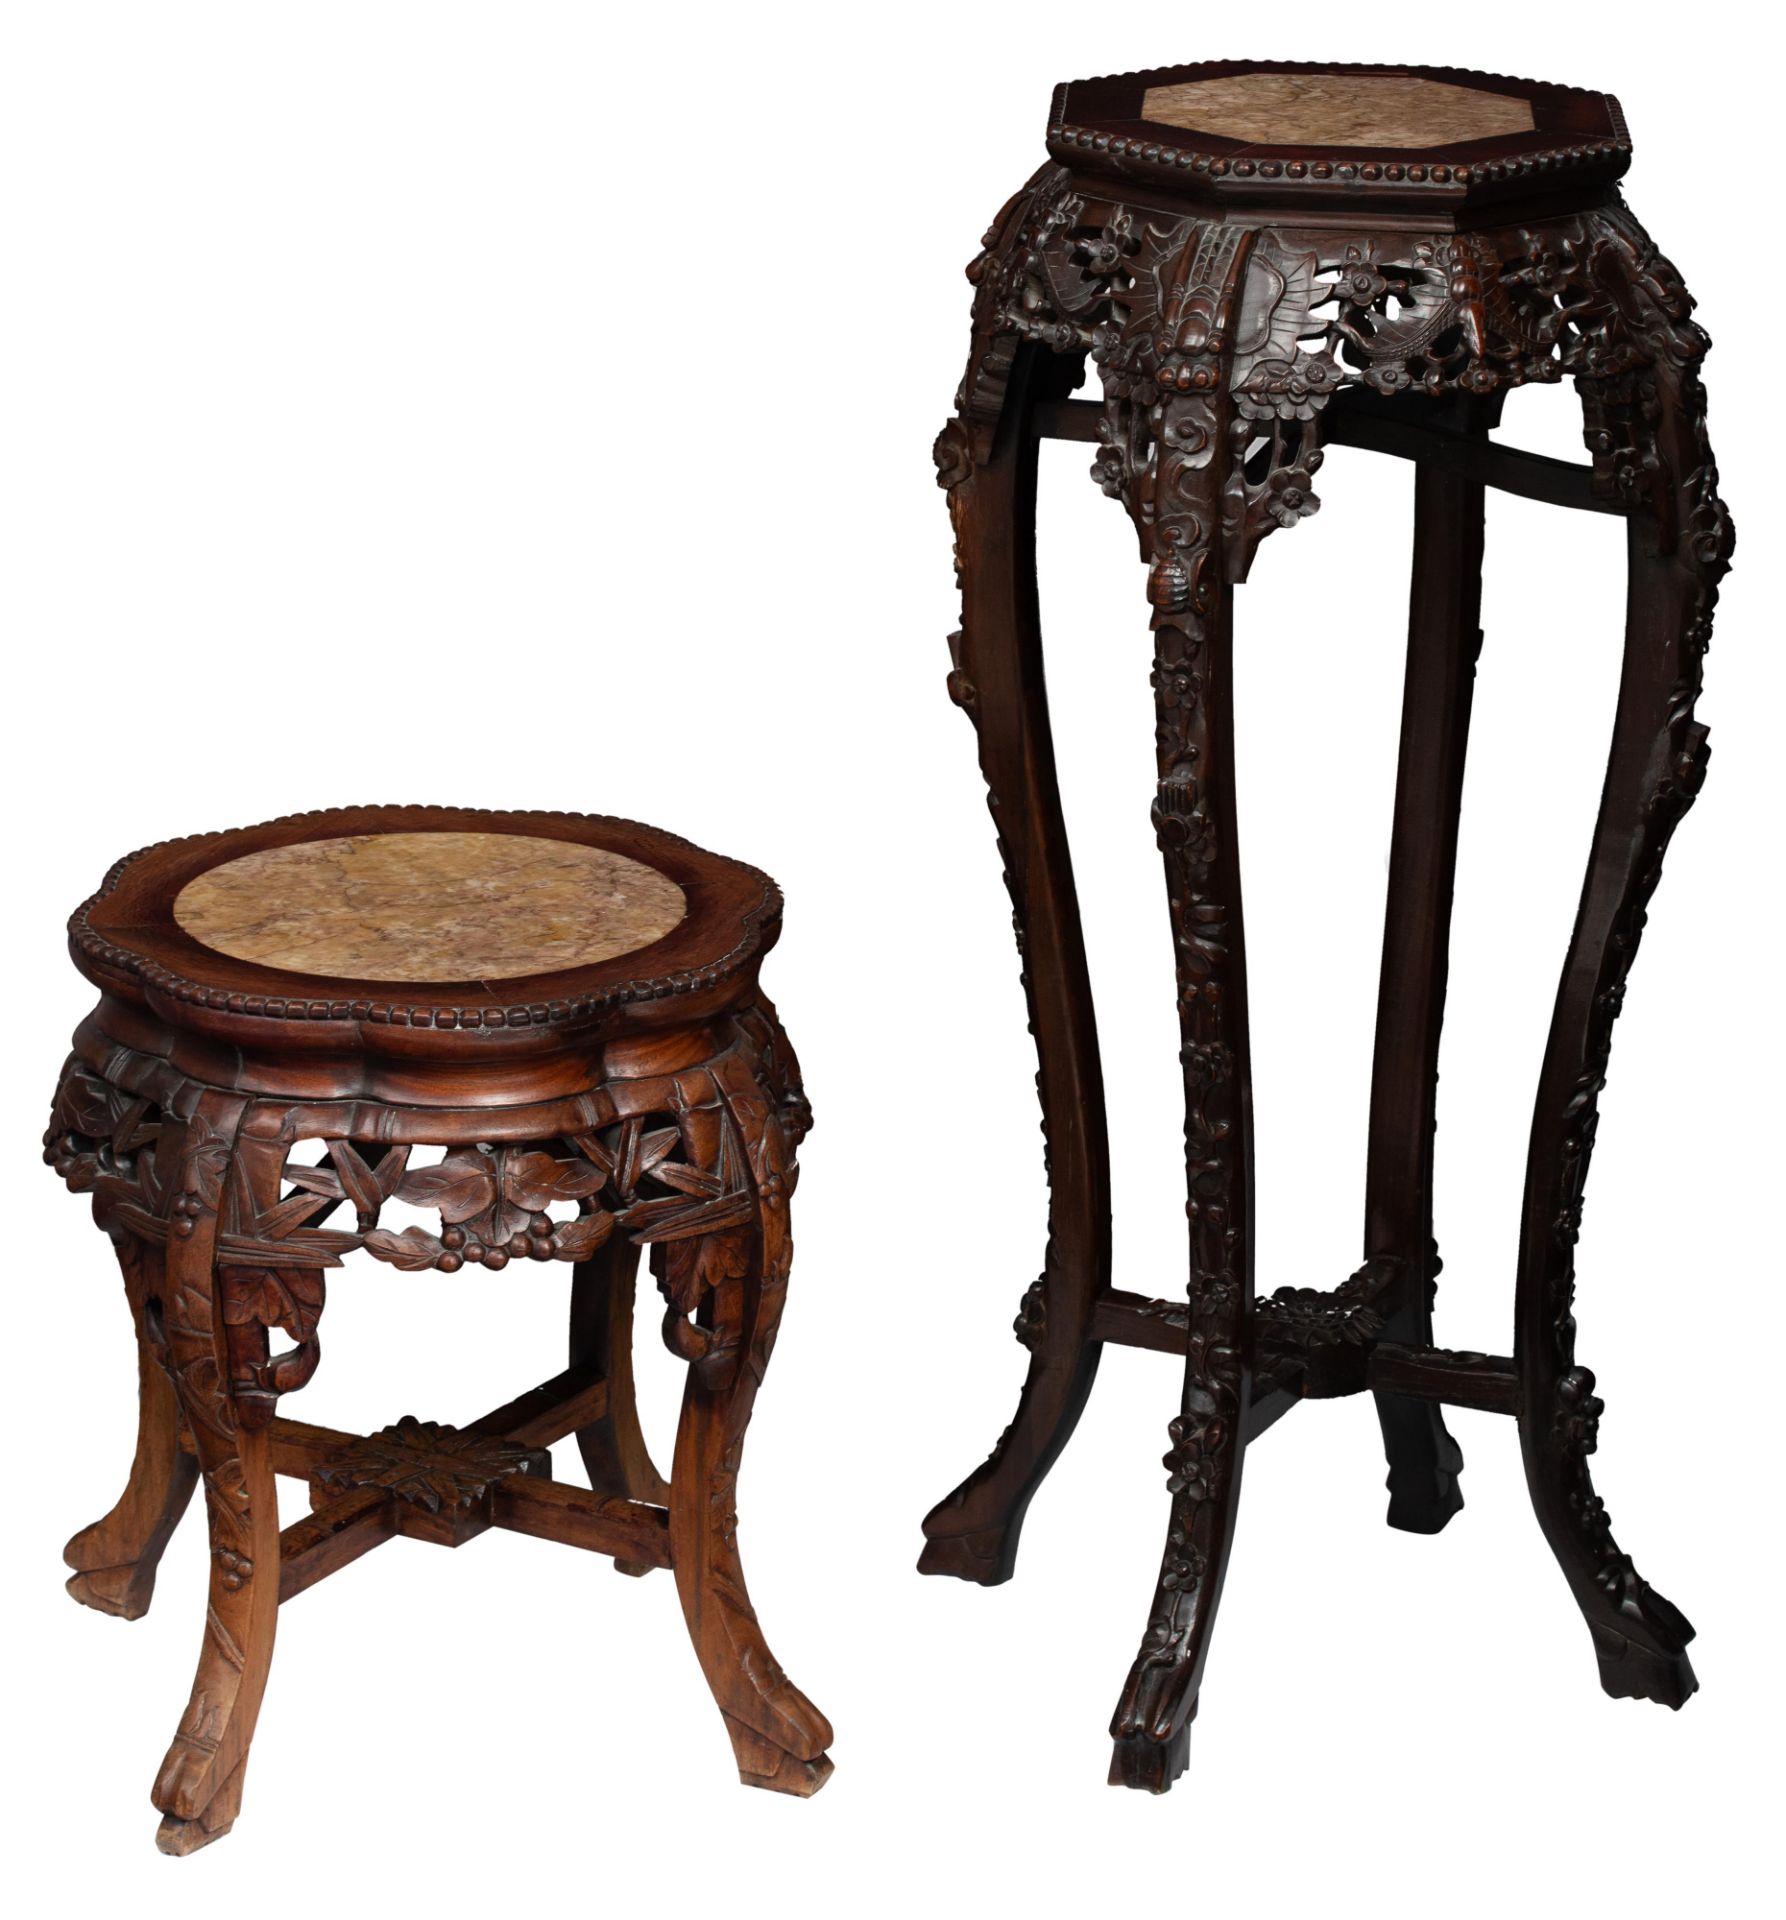 Two Chinese richly carved exotic hardwood stands, H 48 - 91 - W 40 - 42 cm